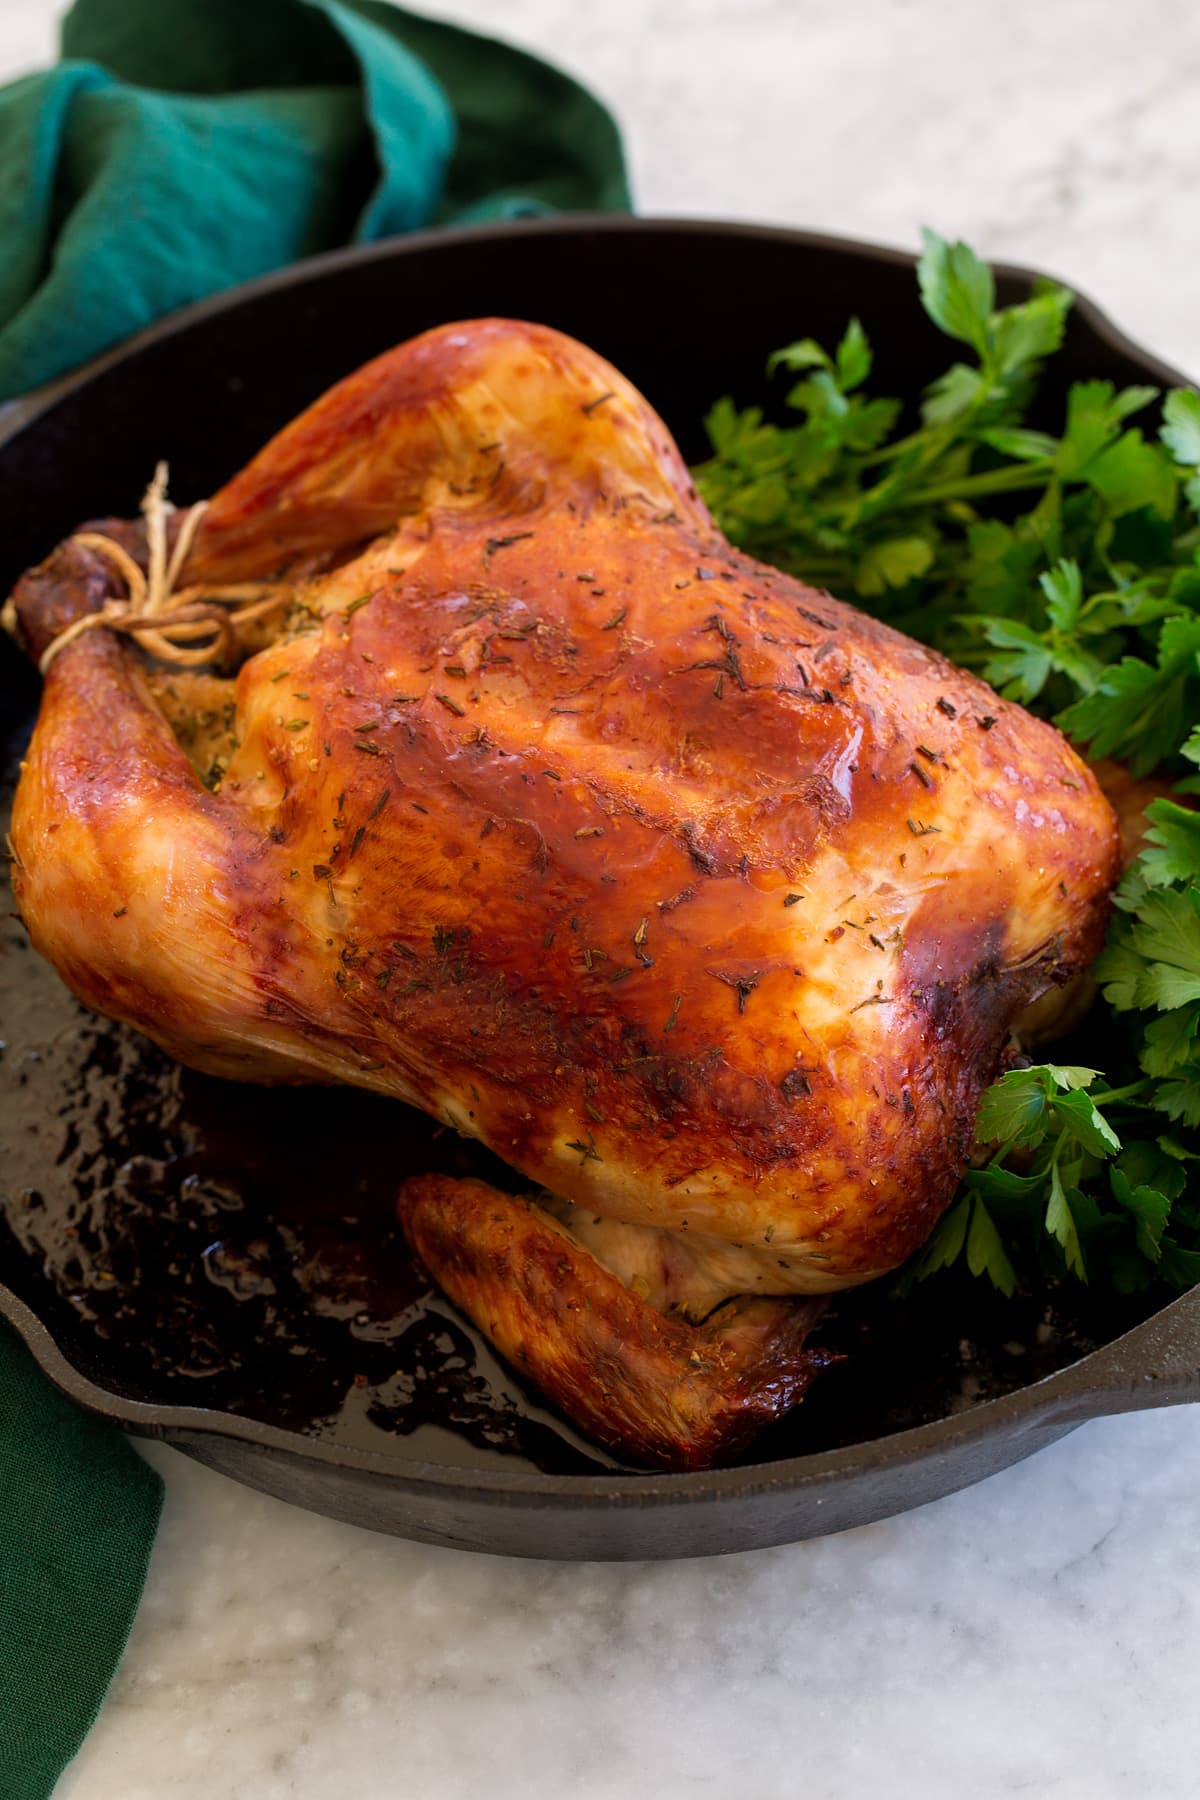 Whole roasted chicken shown in a cast iron skillet with fresh herbs.